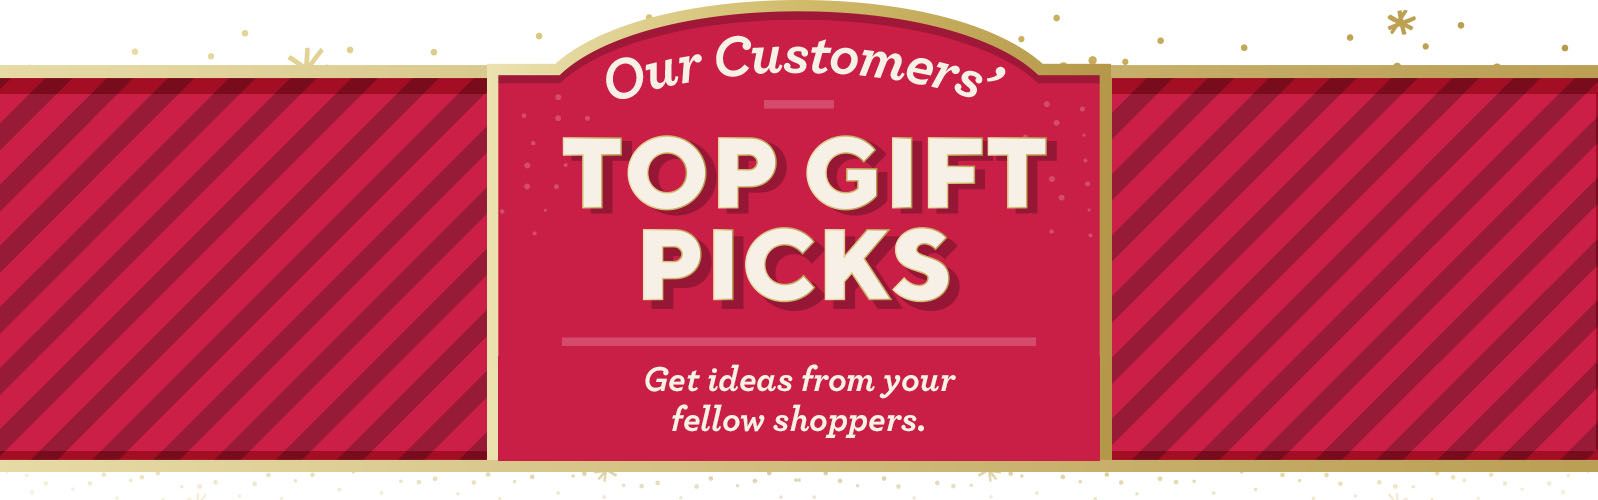 Our Customers' Top Gift Picks - Get ideas from your fellow shoppers.